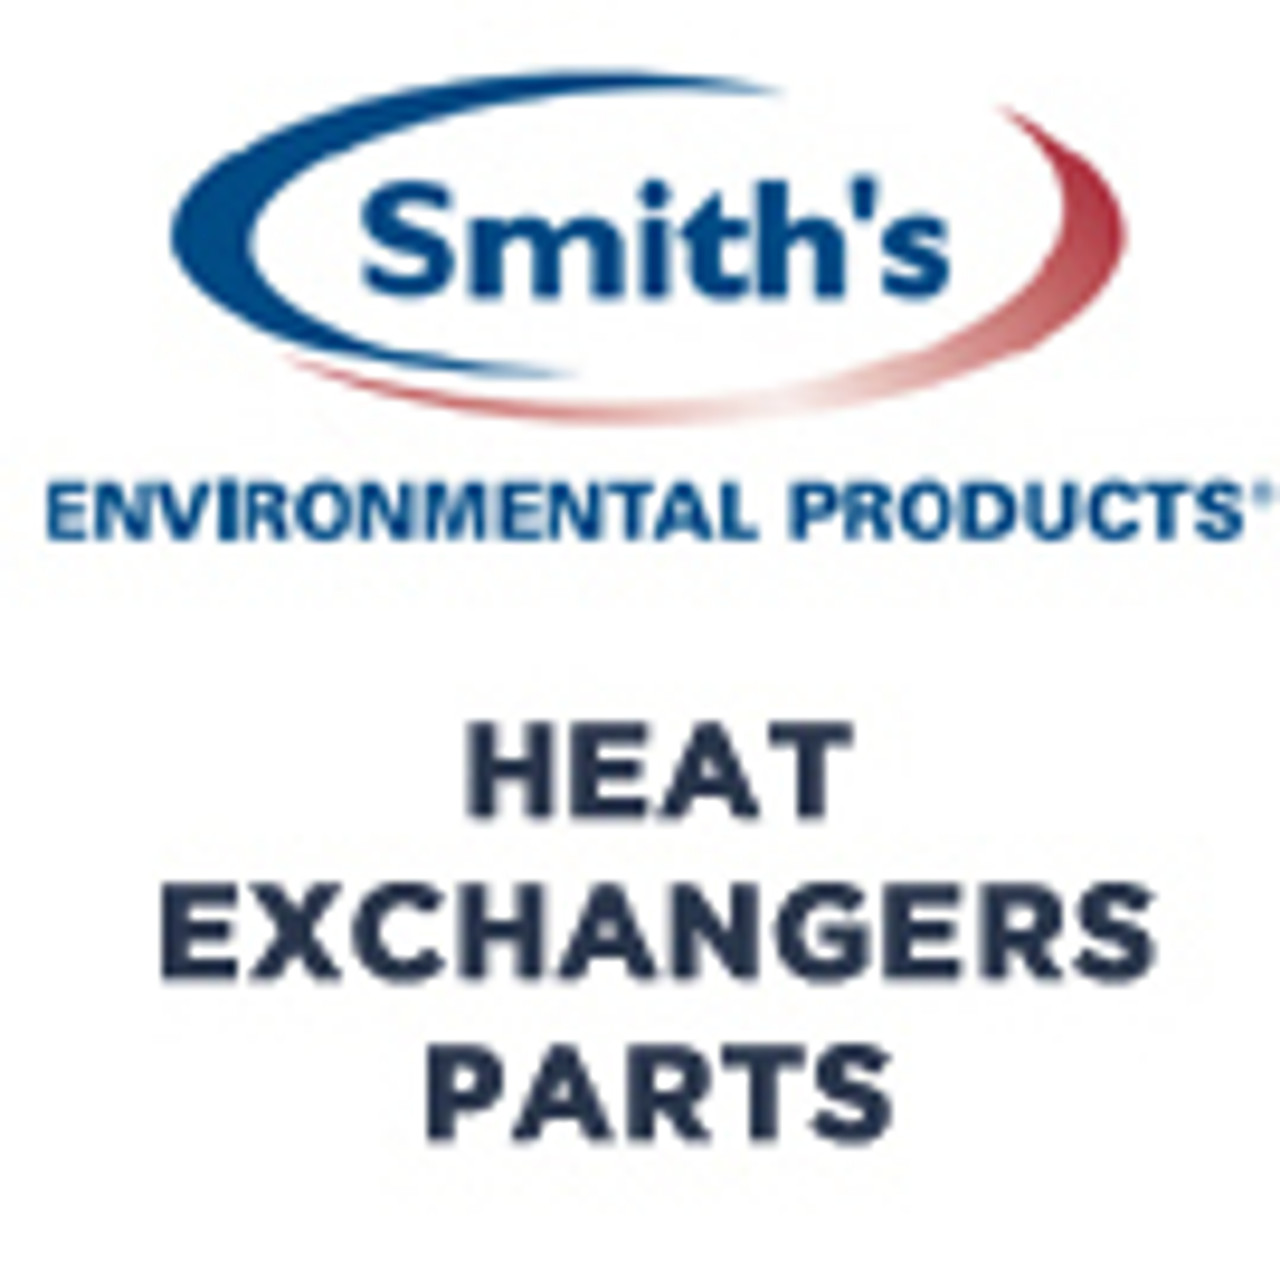 Smiths Environmental Heat Exchangers Parts